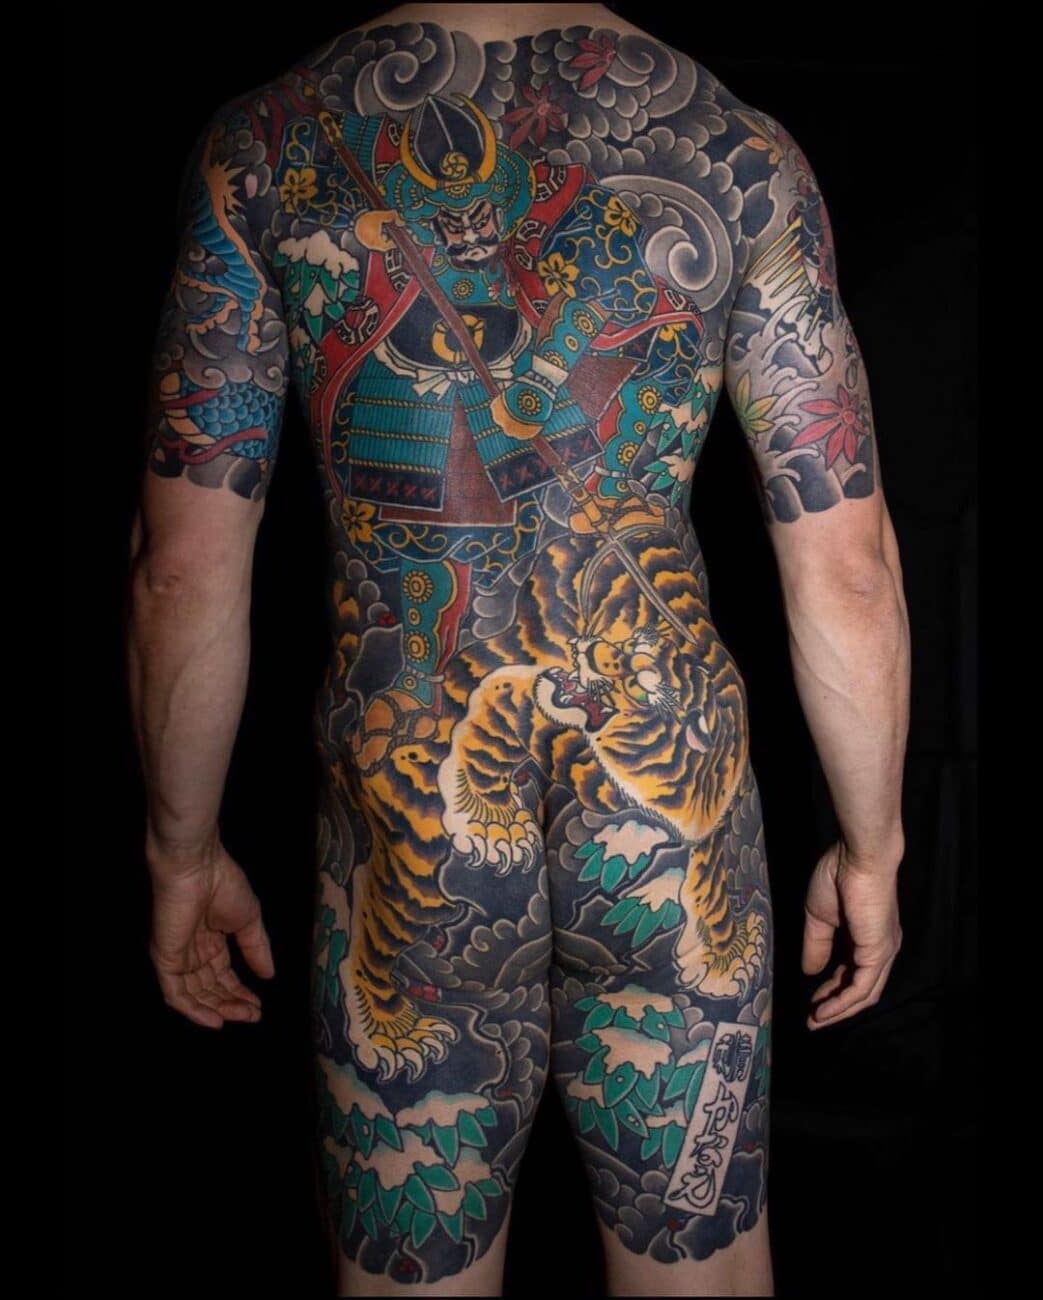 🔥🔥 Japanese tattoos [The Complete Guide] +100 Tattoos 🔥🔥